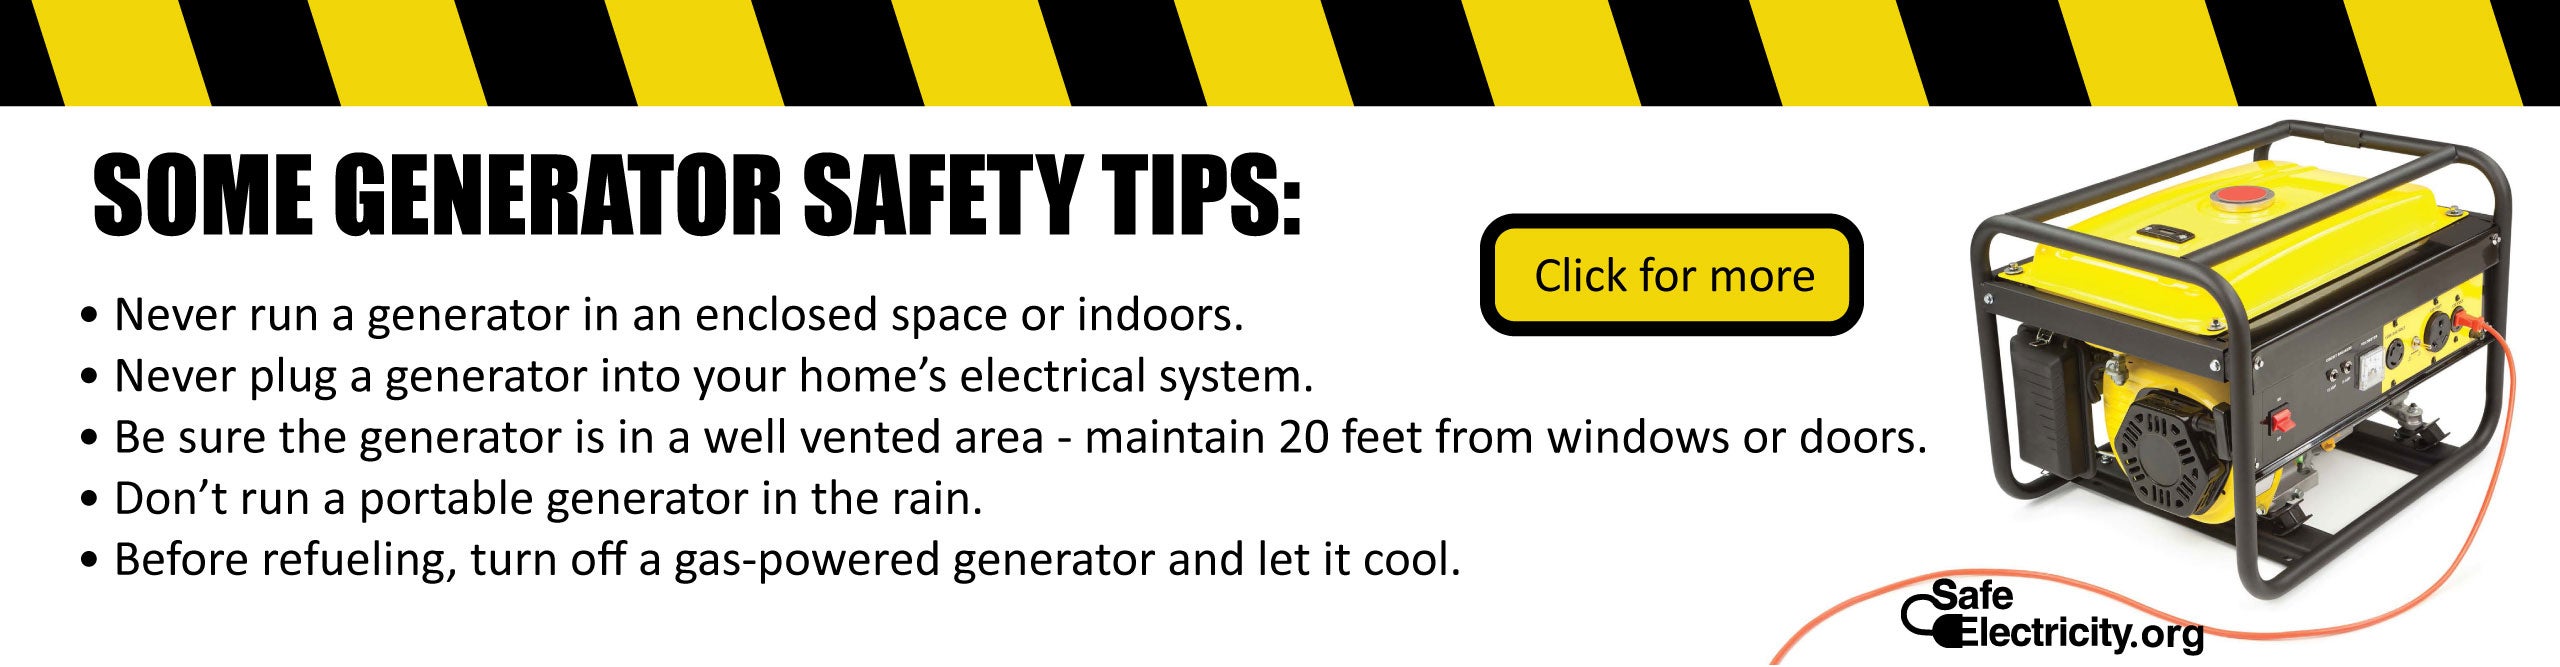 Tips for generator safety